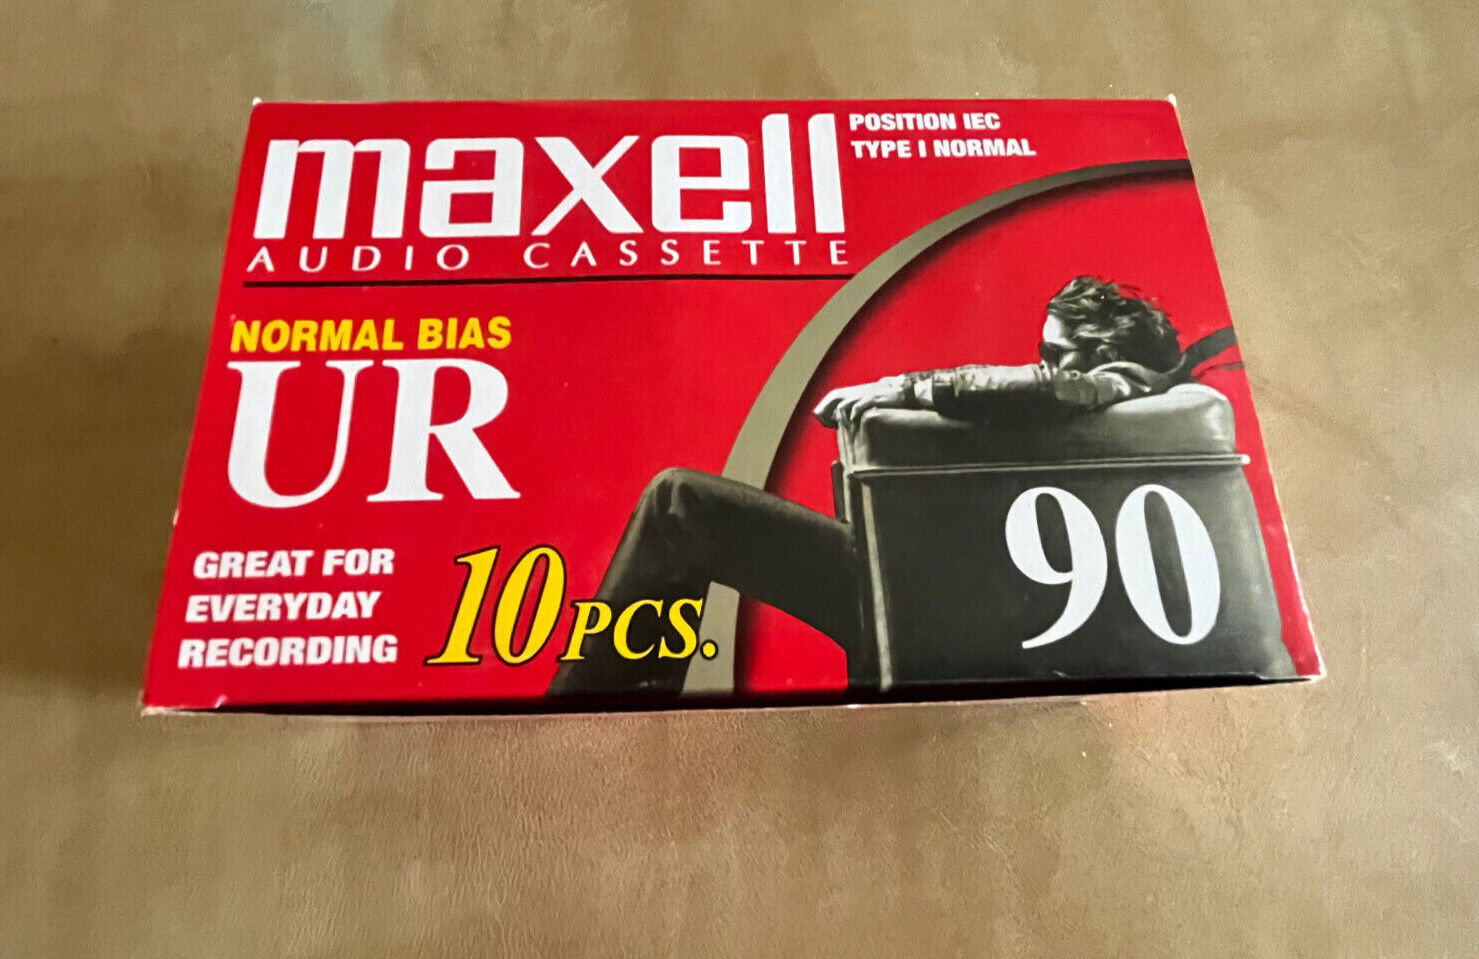 NEW IN BOX MAXELL CASSETTE 10 90 MINUTE TAPES UR NORMAL BIAS FREE US SHPNG